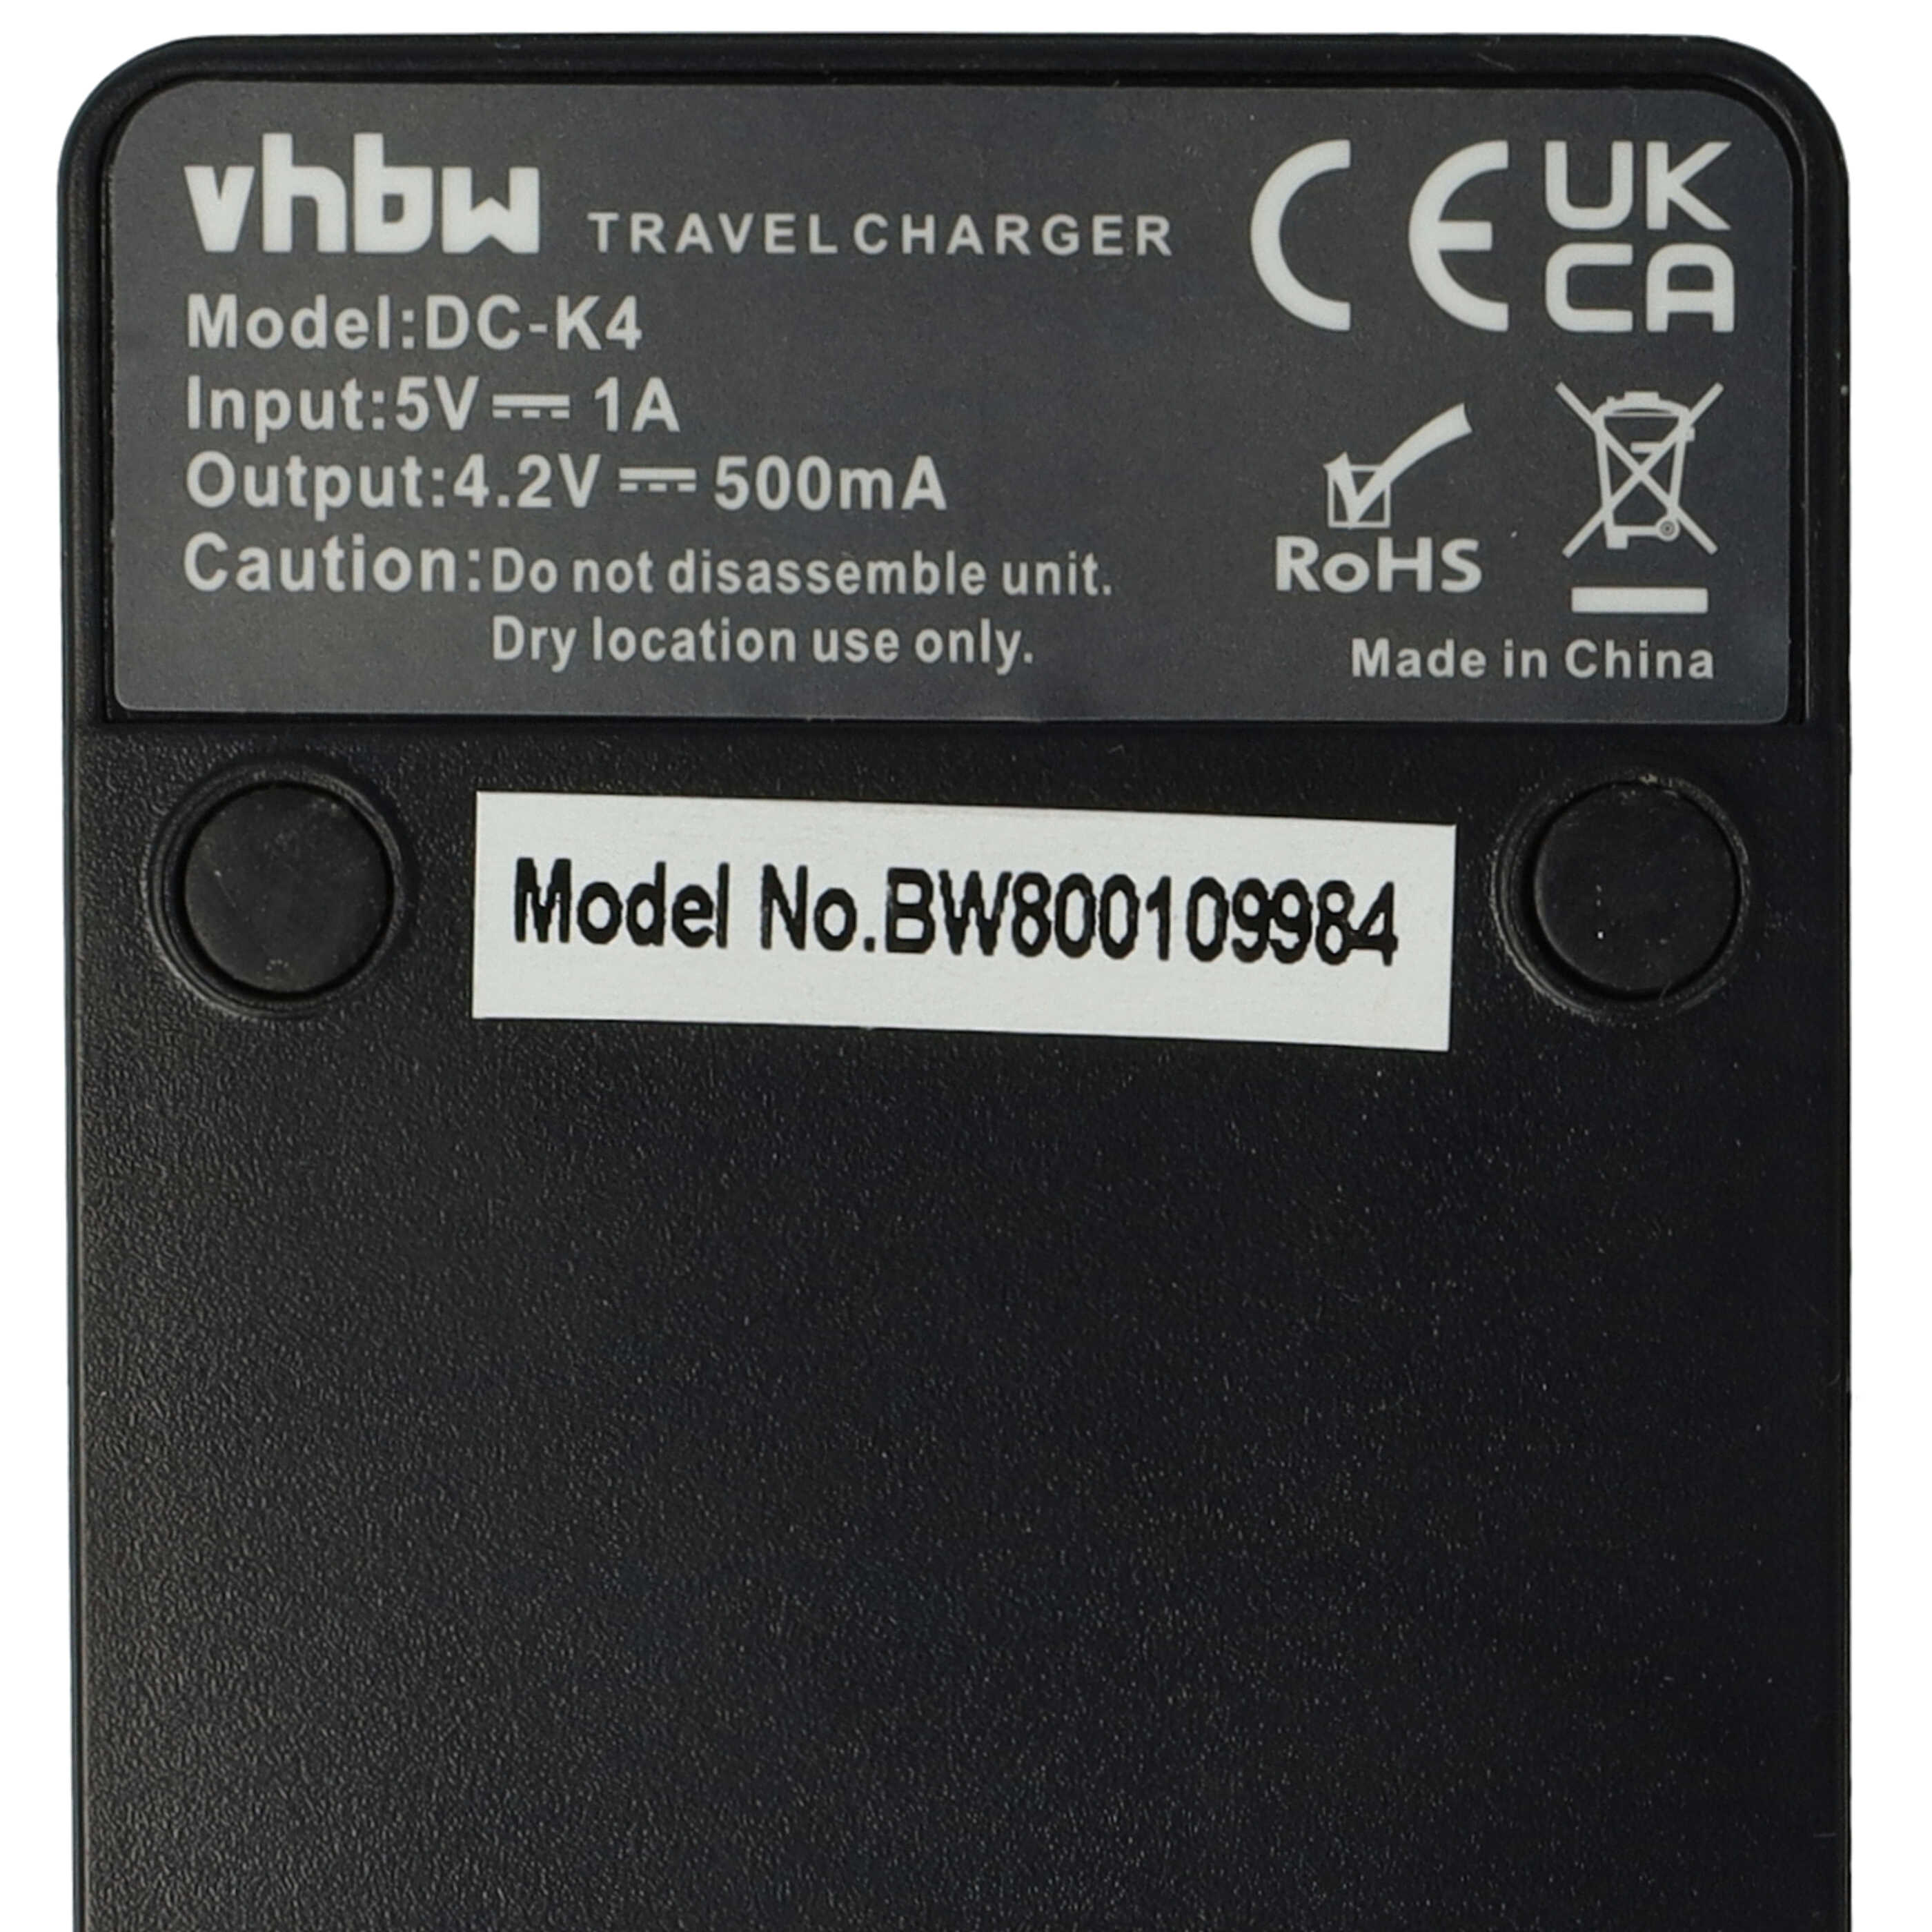 Battery Charger suitable for C Camera etc. - 0.5 A, 4.2 V